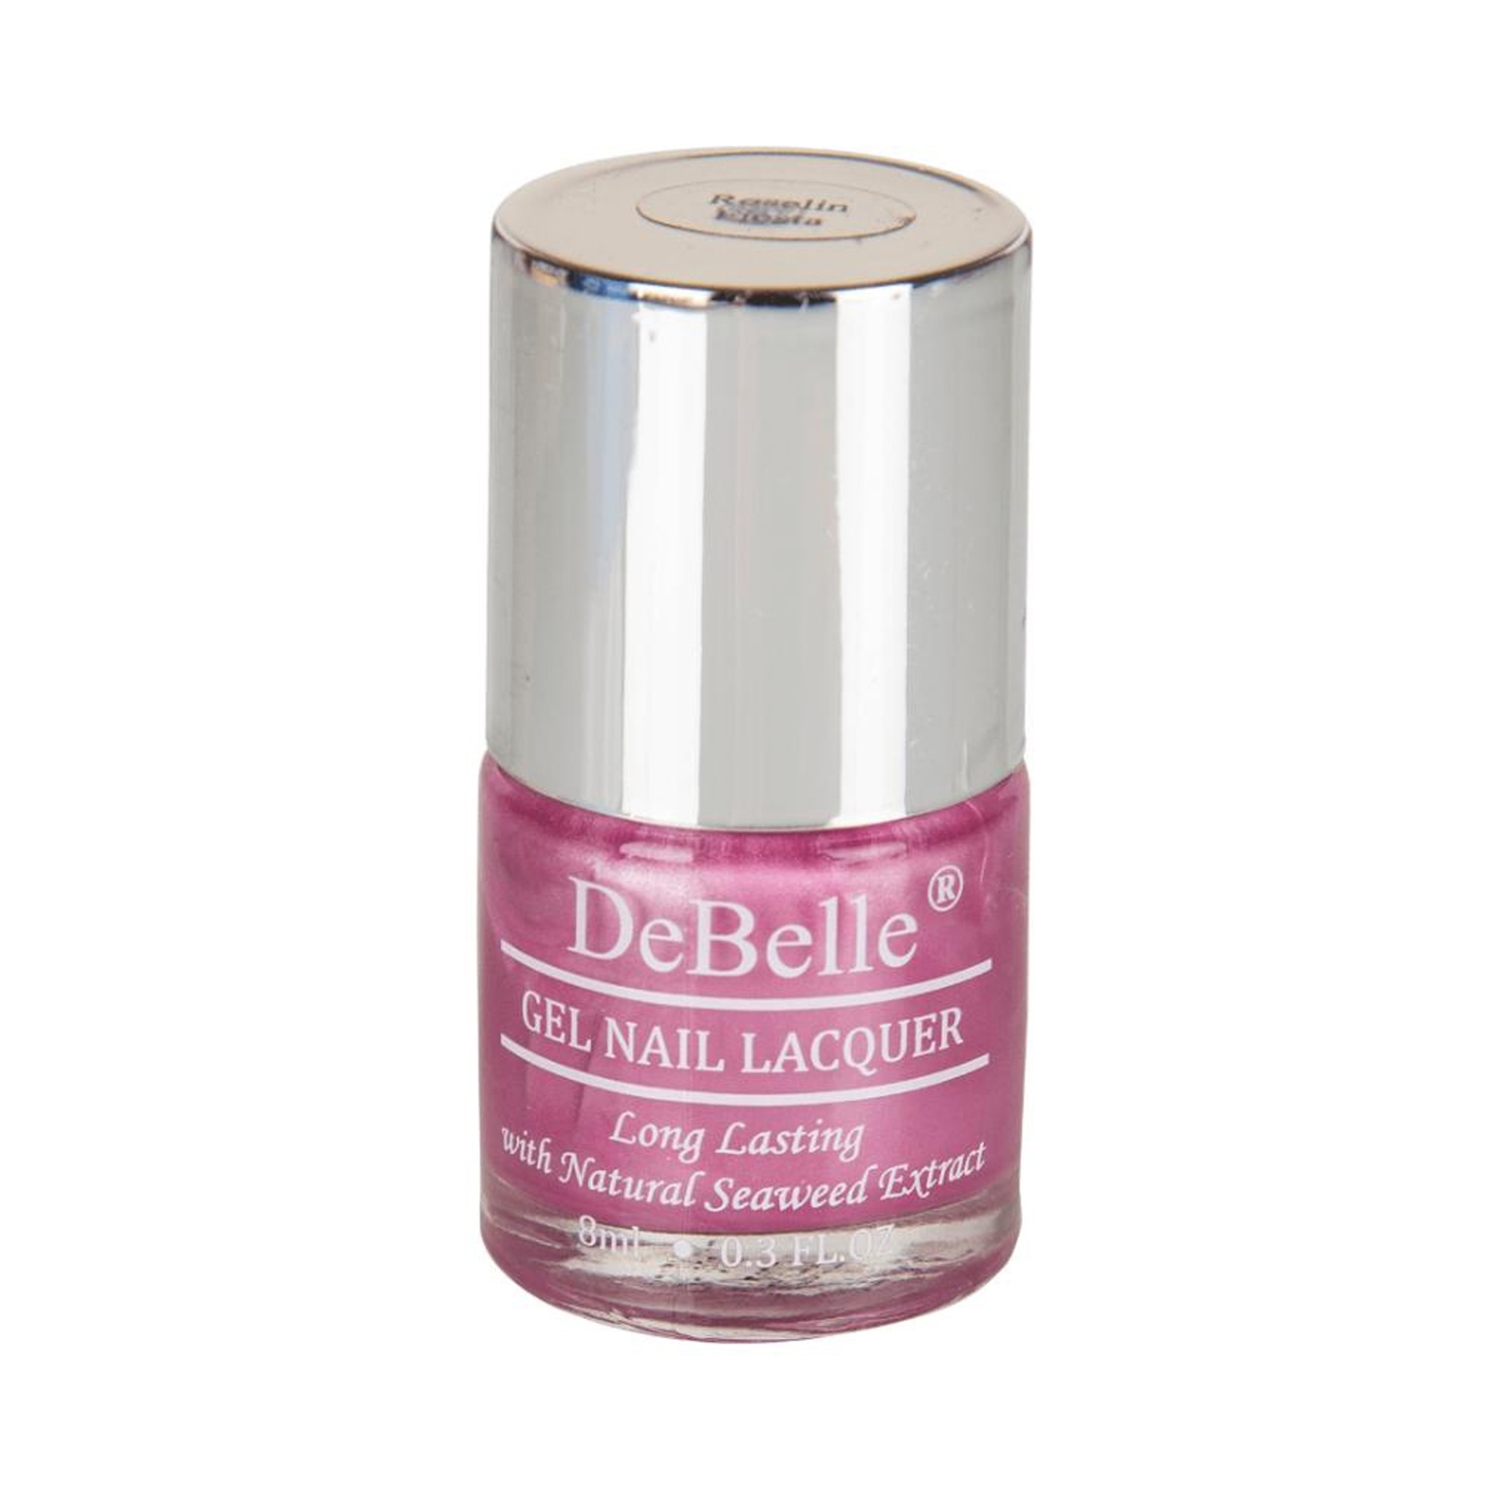 Buy DeBelle Gel Nail Polish Victorian Beige (Beige), 8 ml - Enriched with  natural Seaweed Extract, cruelty Free, Toxic Free Online at Low Prices in  India - Amazon.in